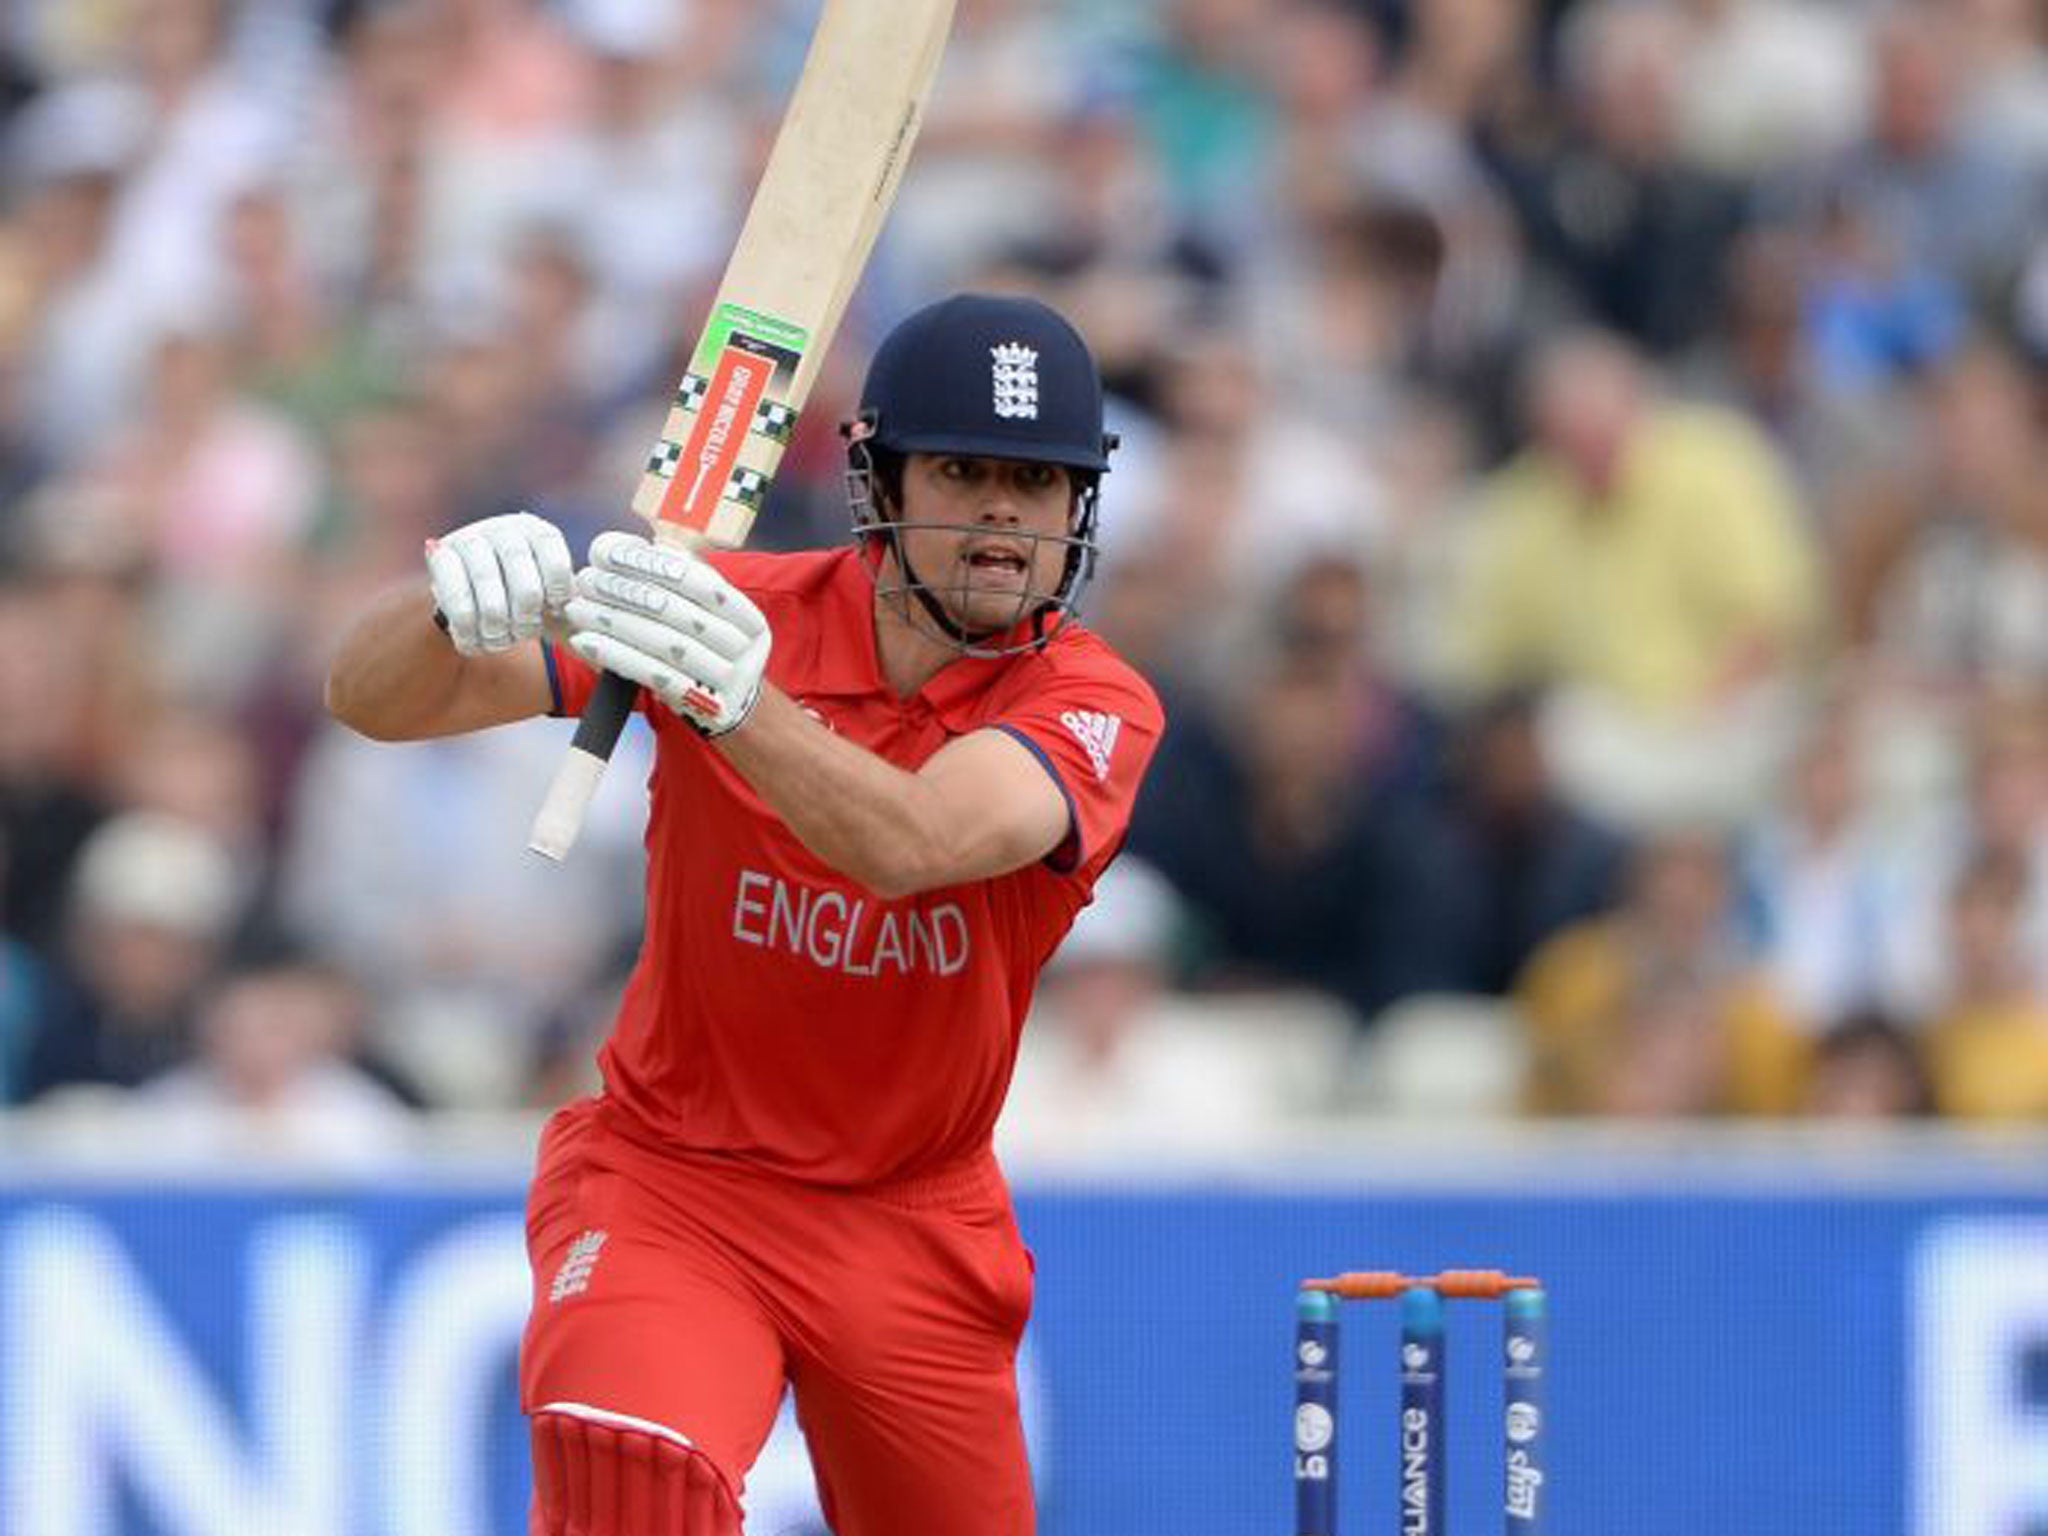 Delighted: England captain Alastair Cook was pleased with the display